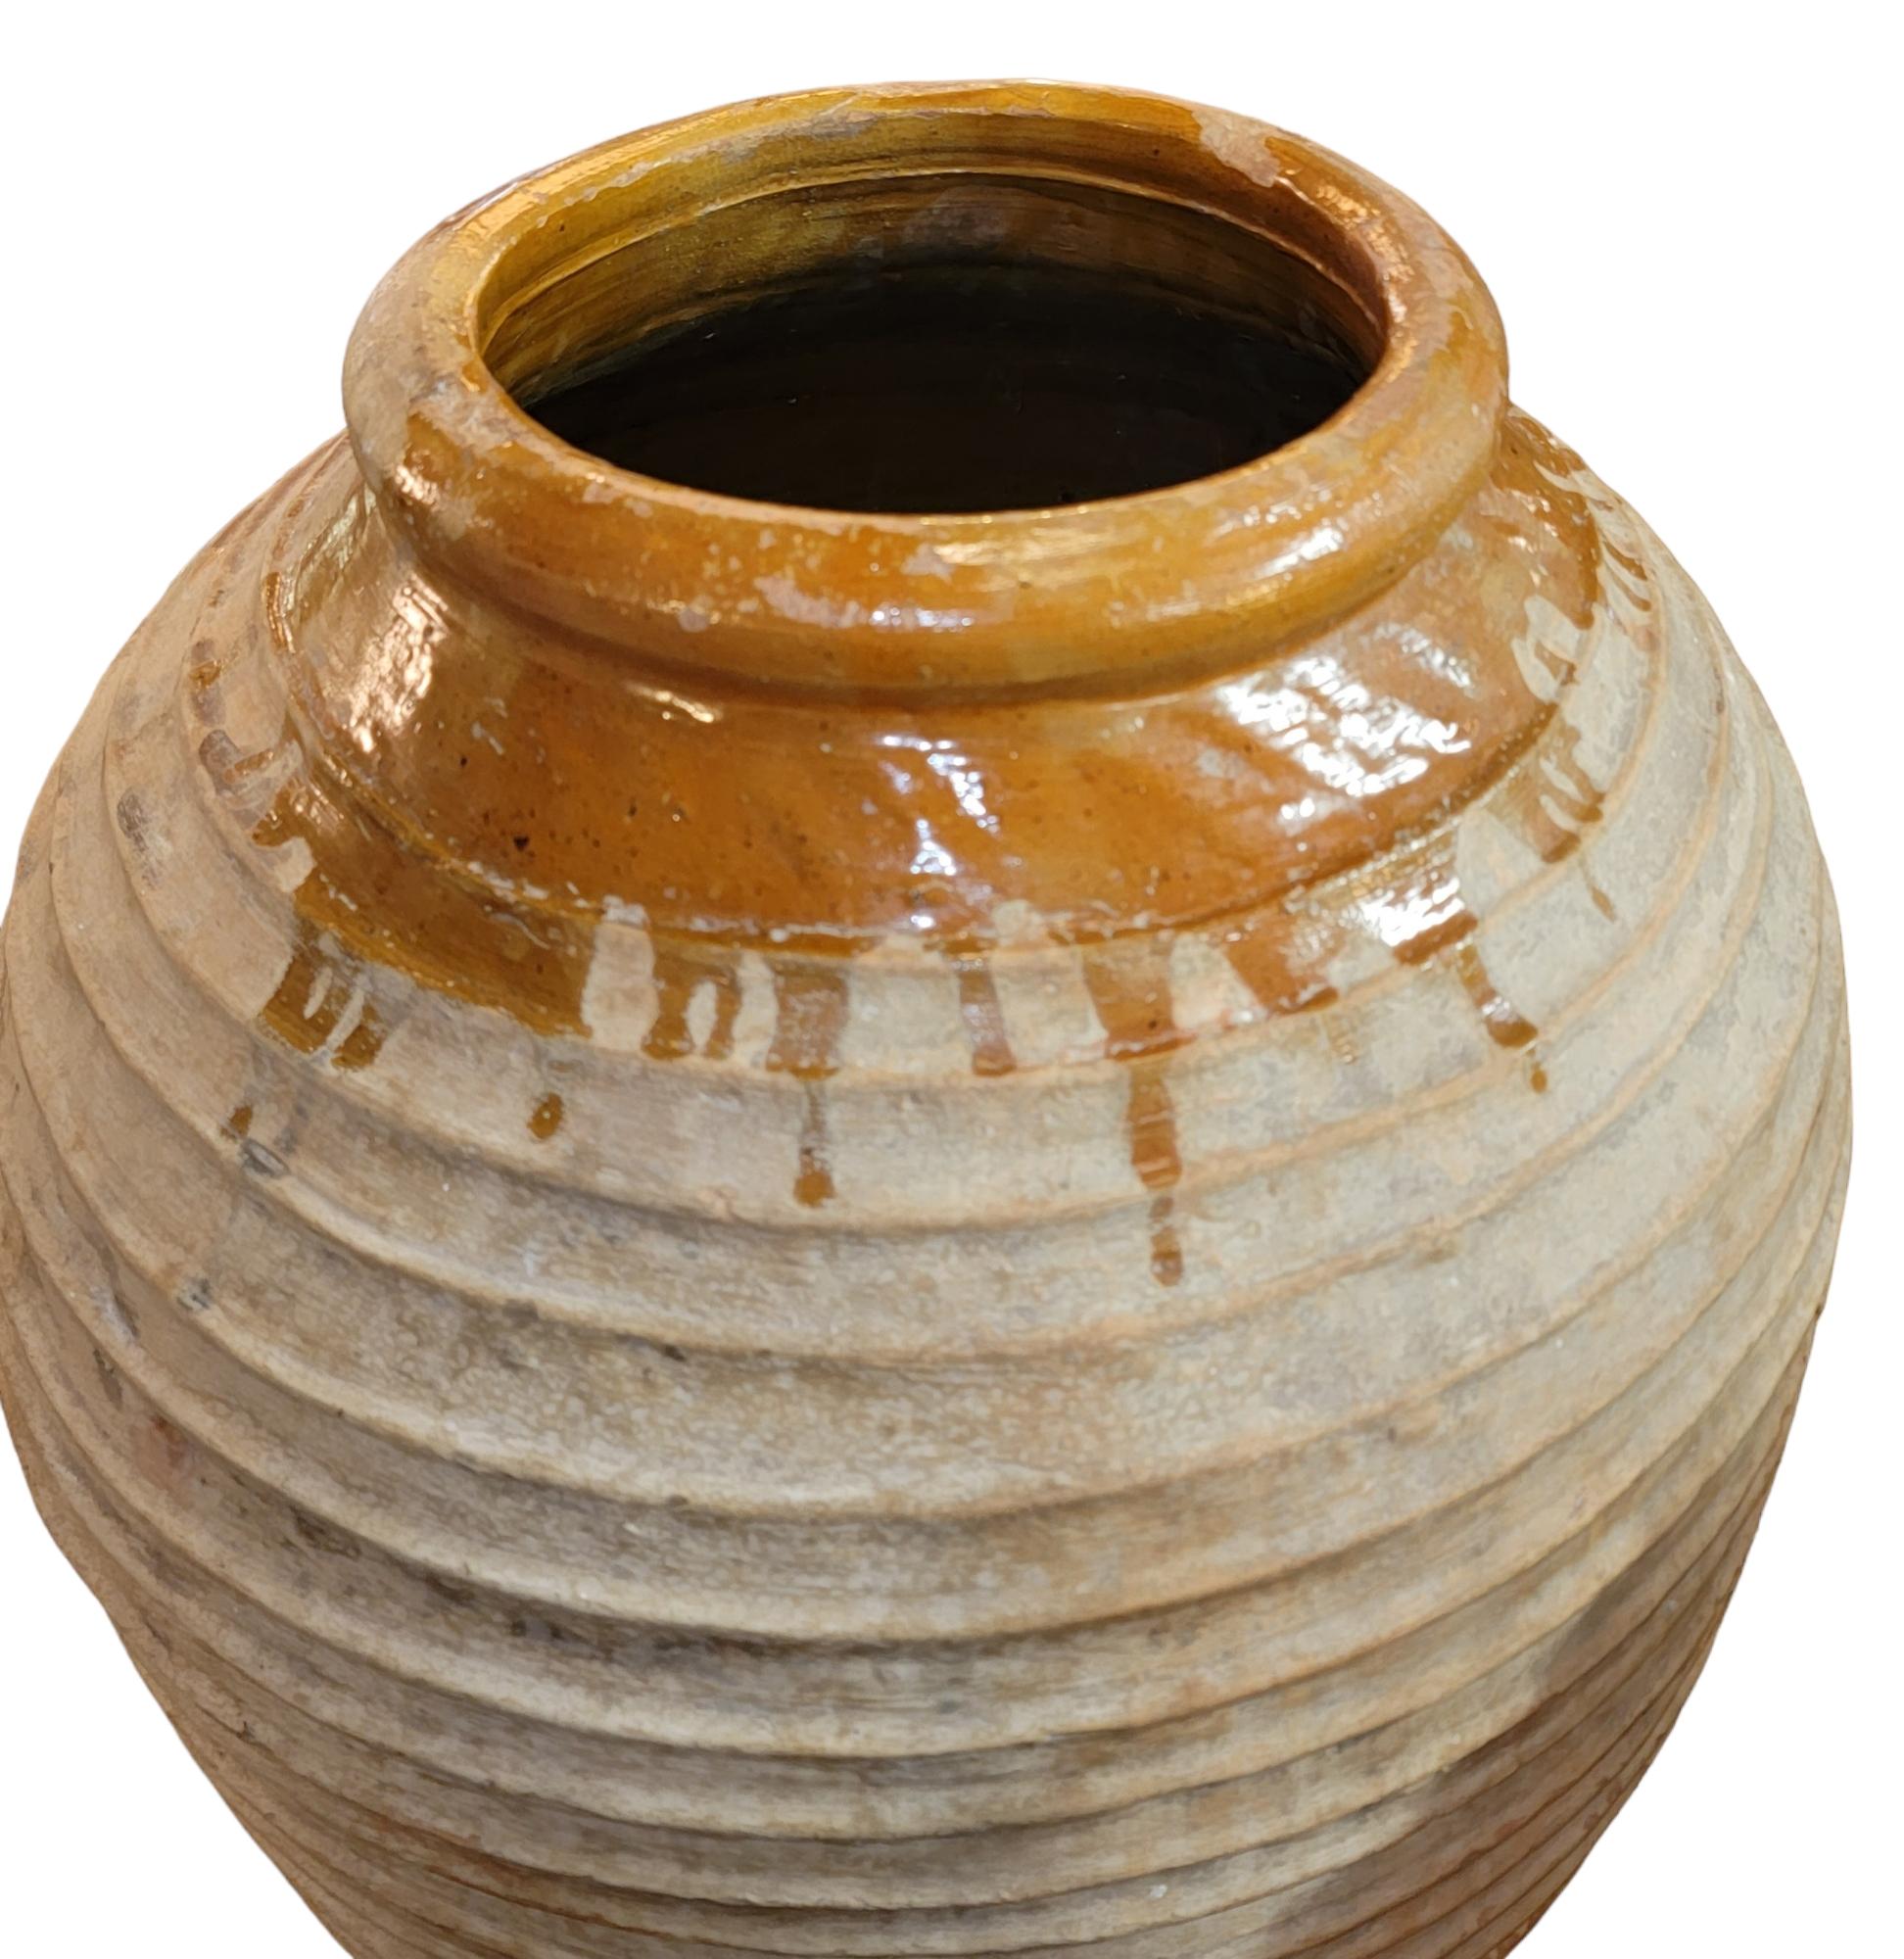 Wonderful colors in a vase. Natural with a honey color on the rim of the vase as to point out the it was a giant honey jar. The Honey paint drip on the rim is amazing and the natural color of the pottery has a wonderful texture that offers a great